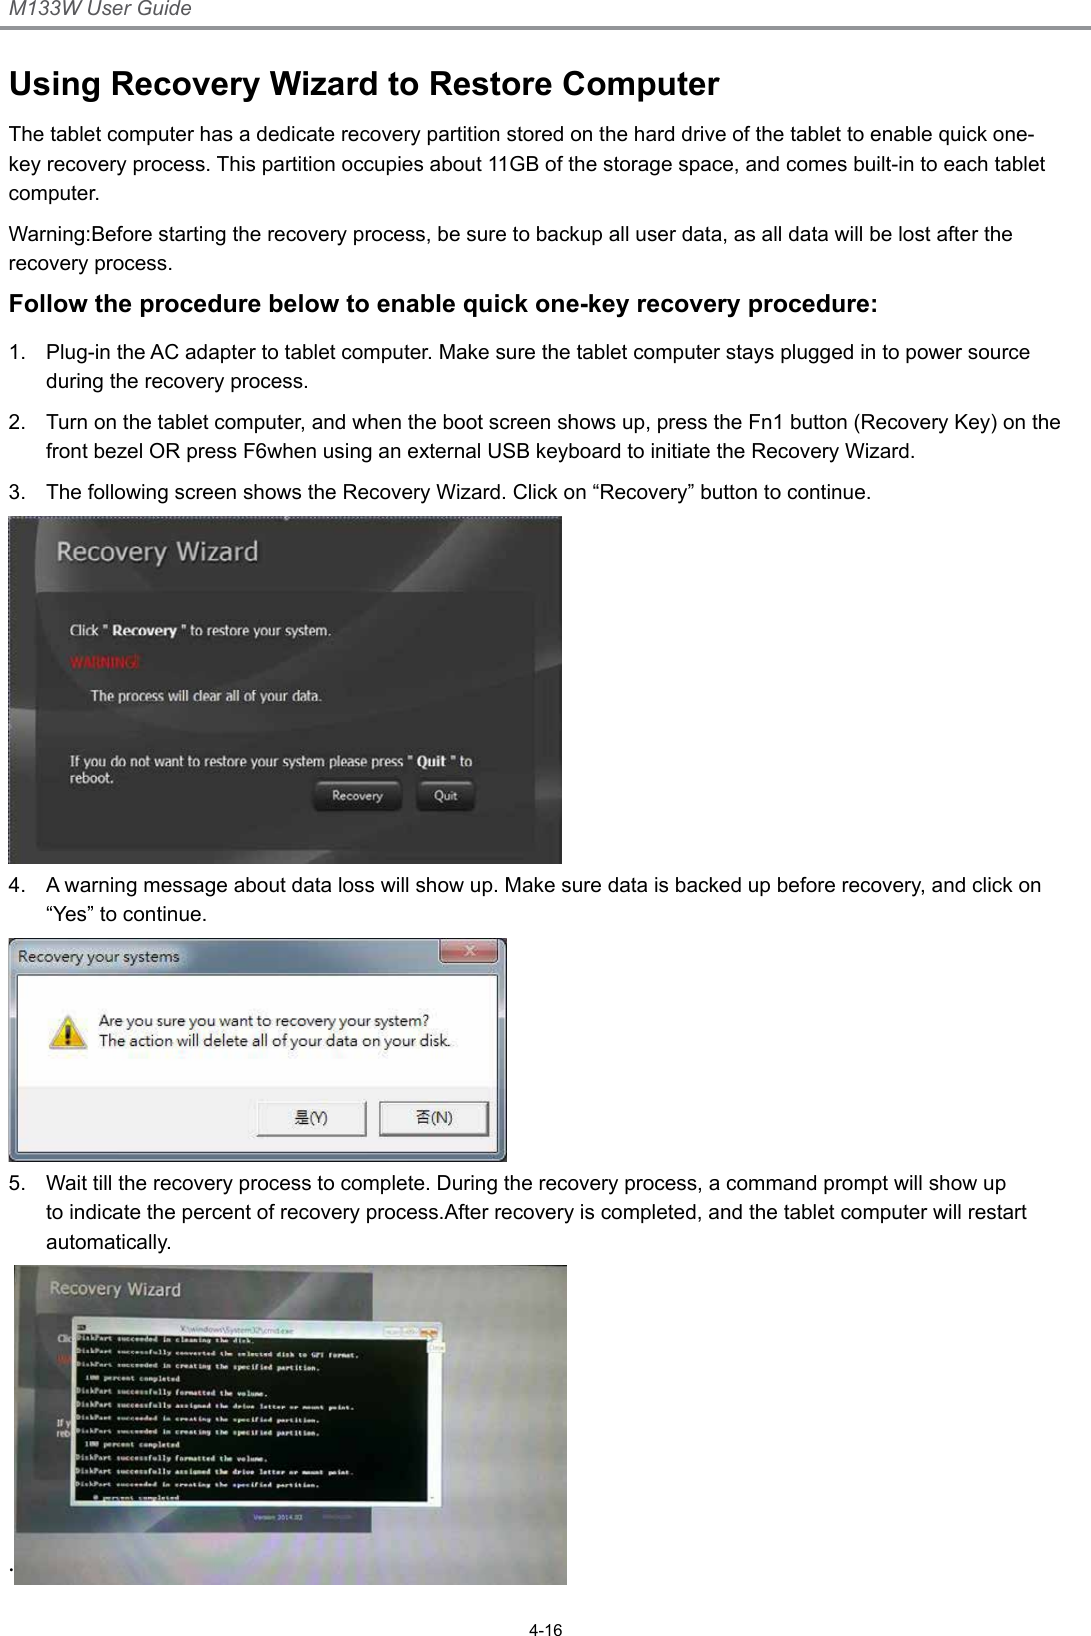 M133W User Guide4-16Using Recovery Wizard to Restore ComputerThe tablet computer has a dedicate recovery partition stored on the hard drive of the tablet to enable quick one-key recovery process. This partition occupies about 11GB of the storage space, and comes built-in to each tablet computer.Warning:Before starting the recovery process, be sure to backup all user data, as all data will be lost after the recovery process.Follow the procedure below to enable quick one-key recovery procedure:1.  Plug-in the AC adapter to tablet computer. Make sure the tablet computer stays plugged in to power source during the recovery process.2.  Turn on the tablet computer, and when the boot screen shows up, press the Fn1 button (Recovery Key) on the front bezel OR press F6when using an external USB keyboard to initiate the Recovery Wizard.3.  The following screen shows the Recovery Wizard. Click on “Recovery” button to continue.4.  A warning message about data loss will show up. Make sure data is backed up before recovery, and click on “Yes” to continue.5.  Wait till the recovery process to complete. During the recovery process, a command prompt will show up to indicate the percent of recovery process.After recovery is completed, and the tablet computer will restart automatically..